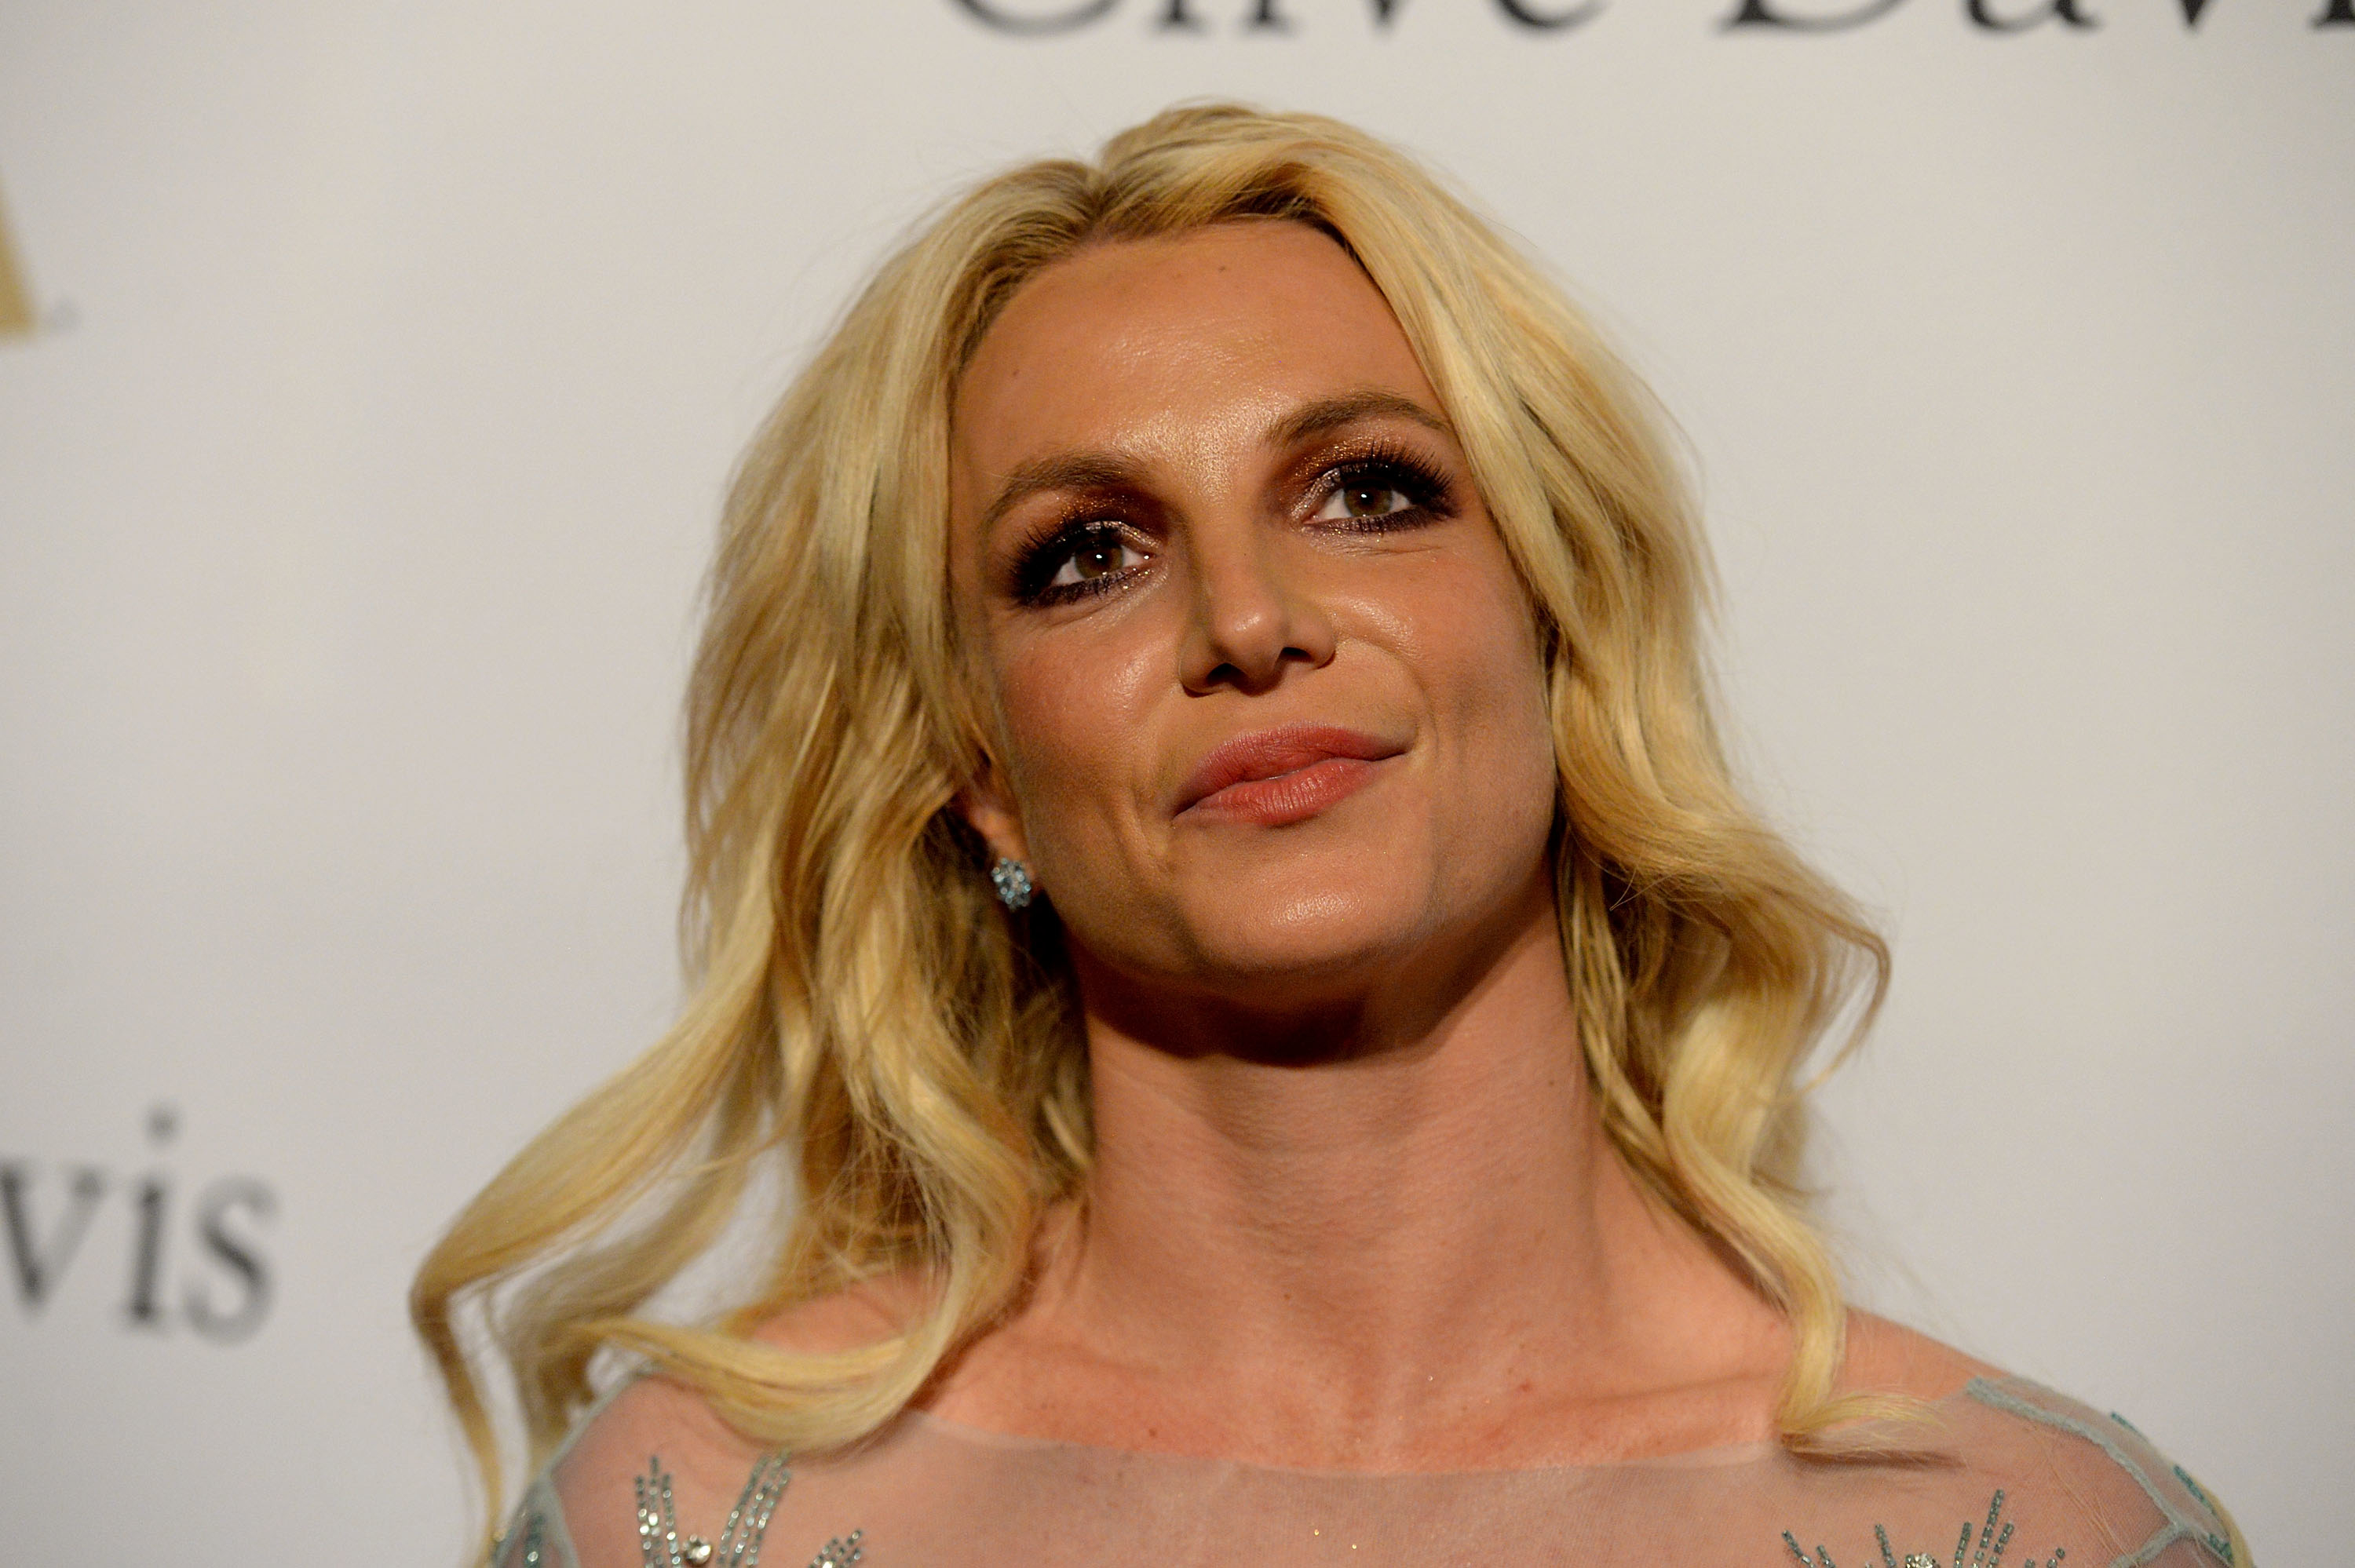 A close-up of Britney at a media event